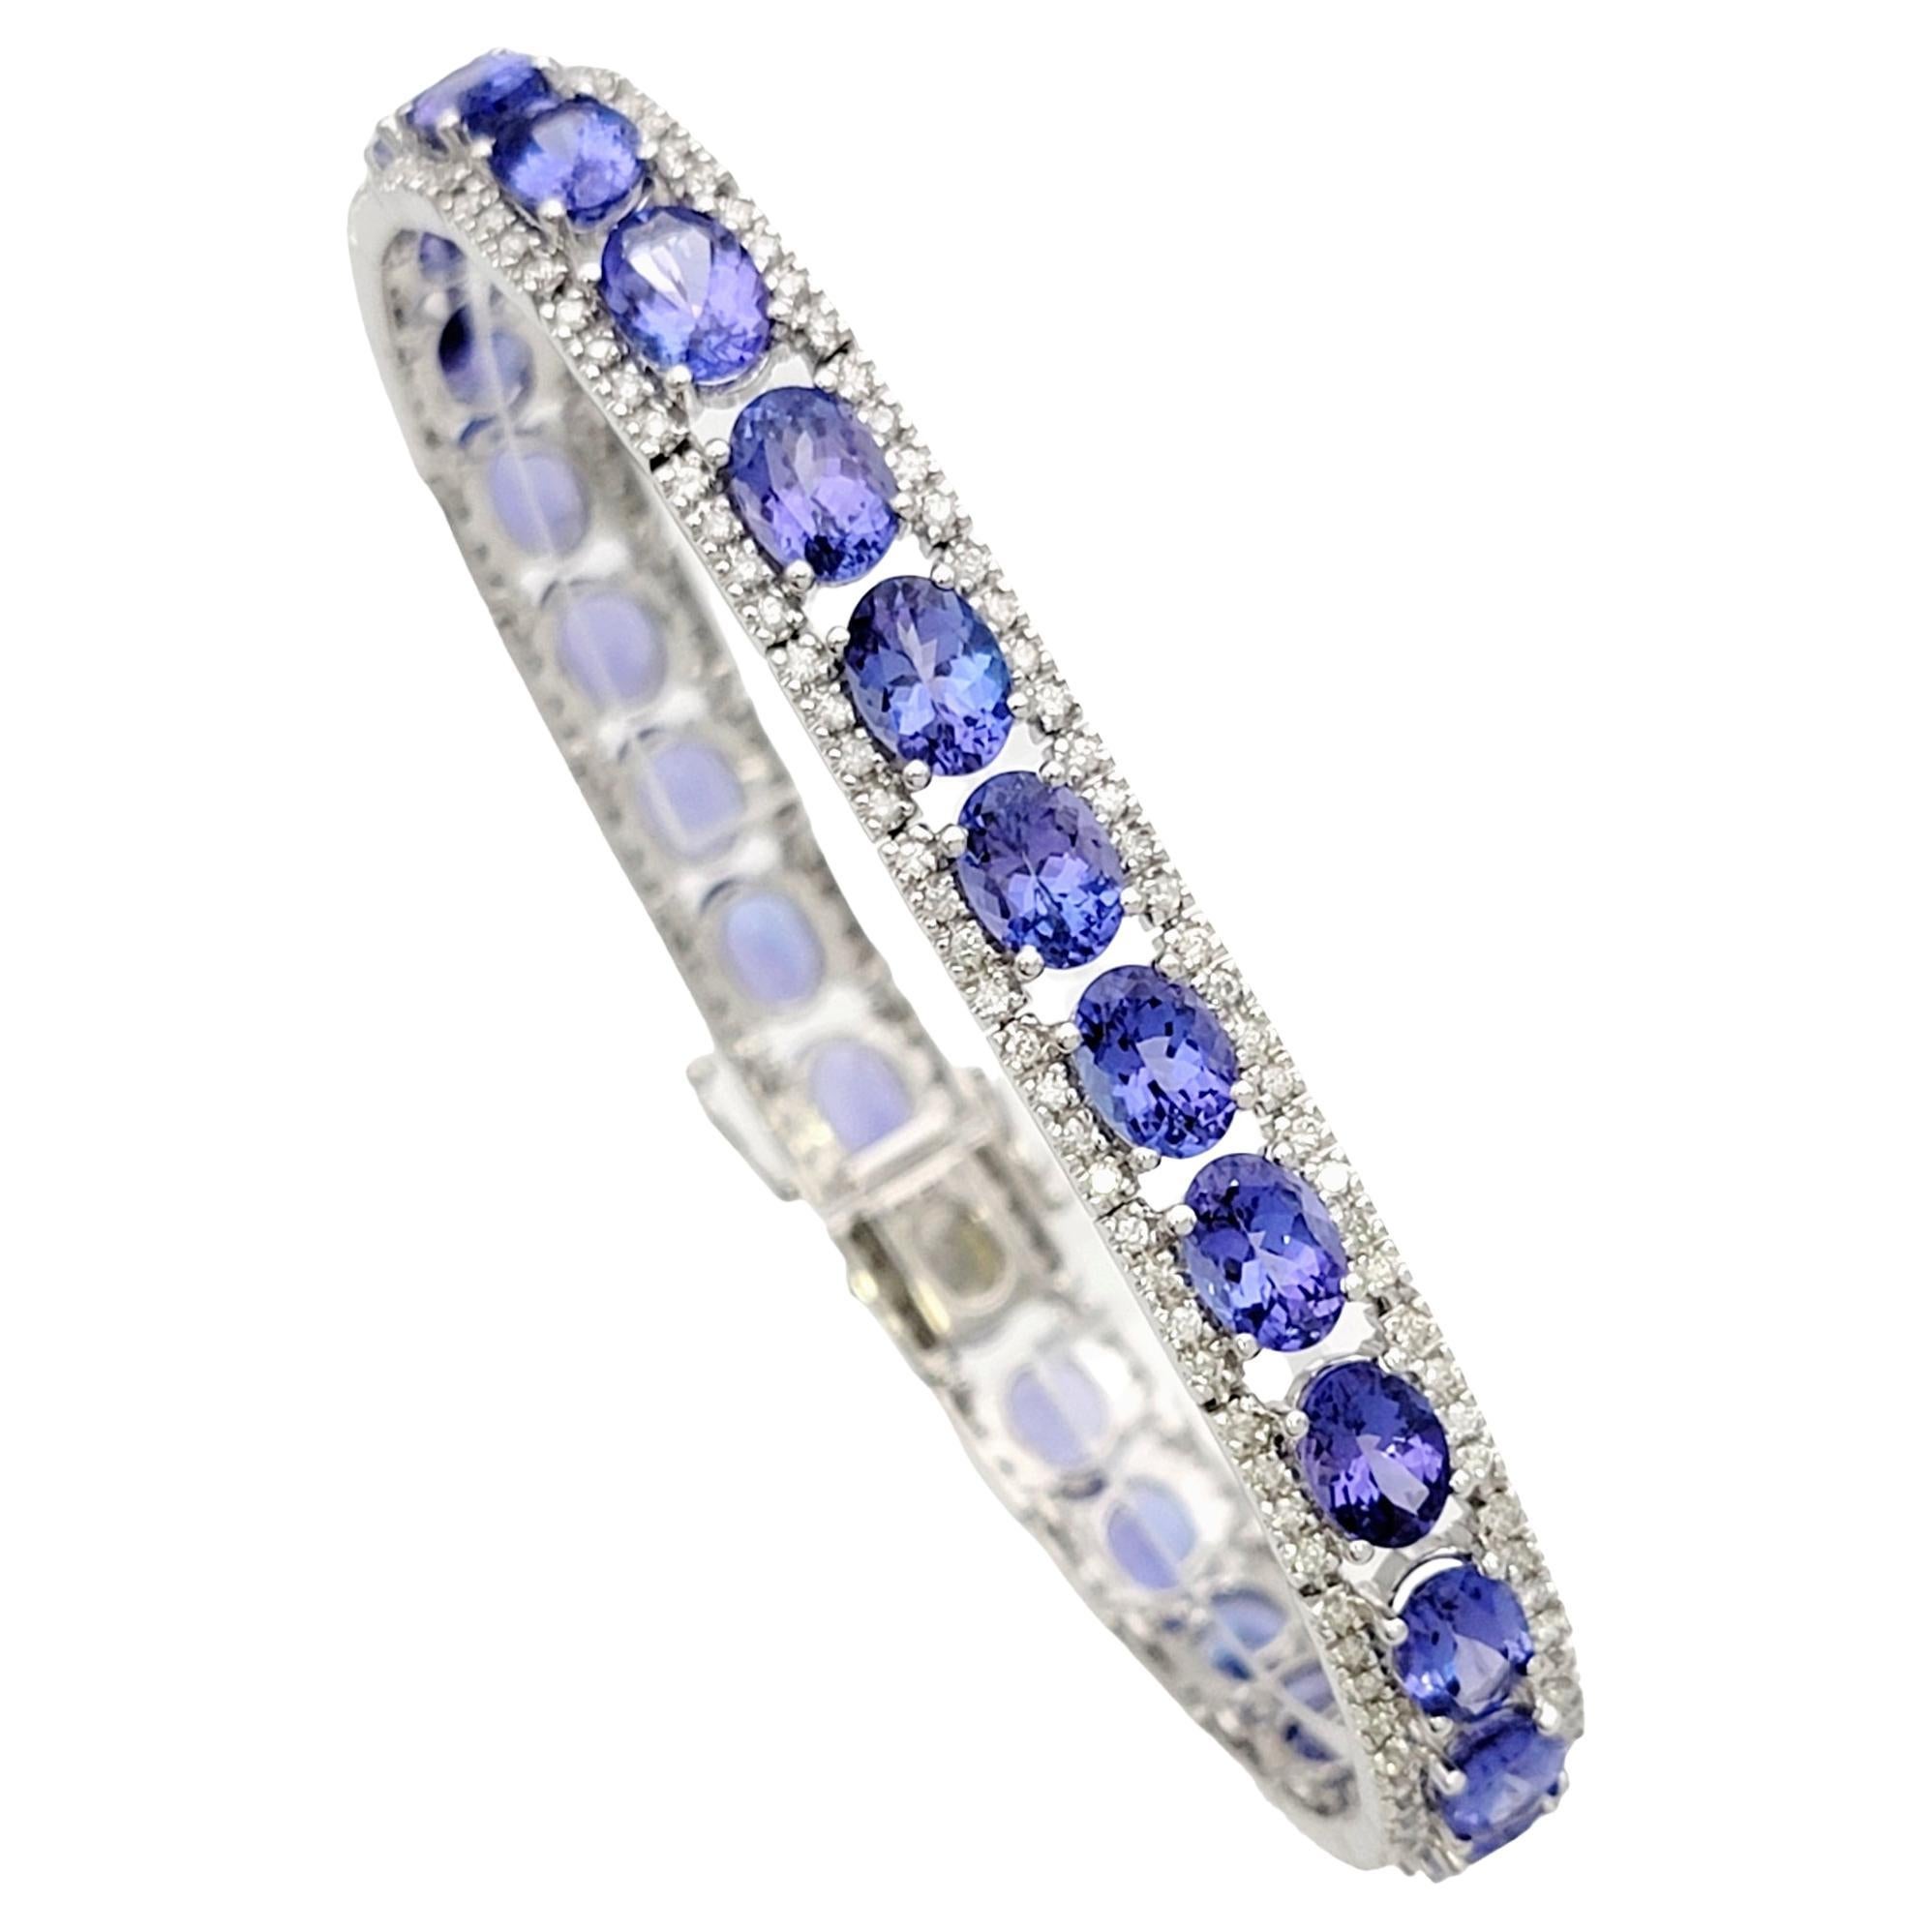 Length: 7.5 Inches

Shown here is an absolutely exquisite tanzanite and diamond line bracelet that embodies the utmost elegance and sophistication. This stunning bracelet is a testament to the timeless beauty of tanzanites, showcasing a stunning